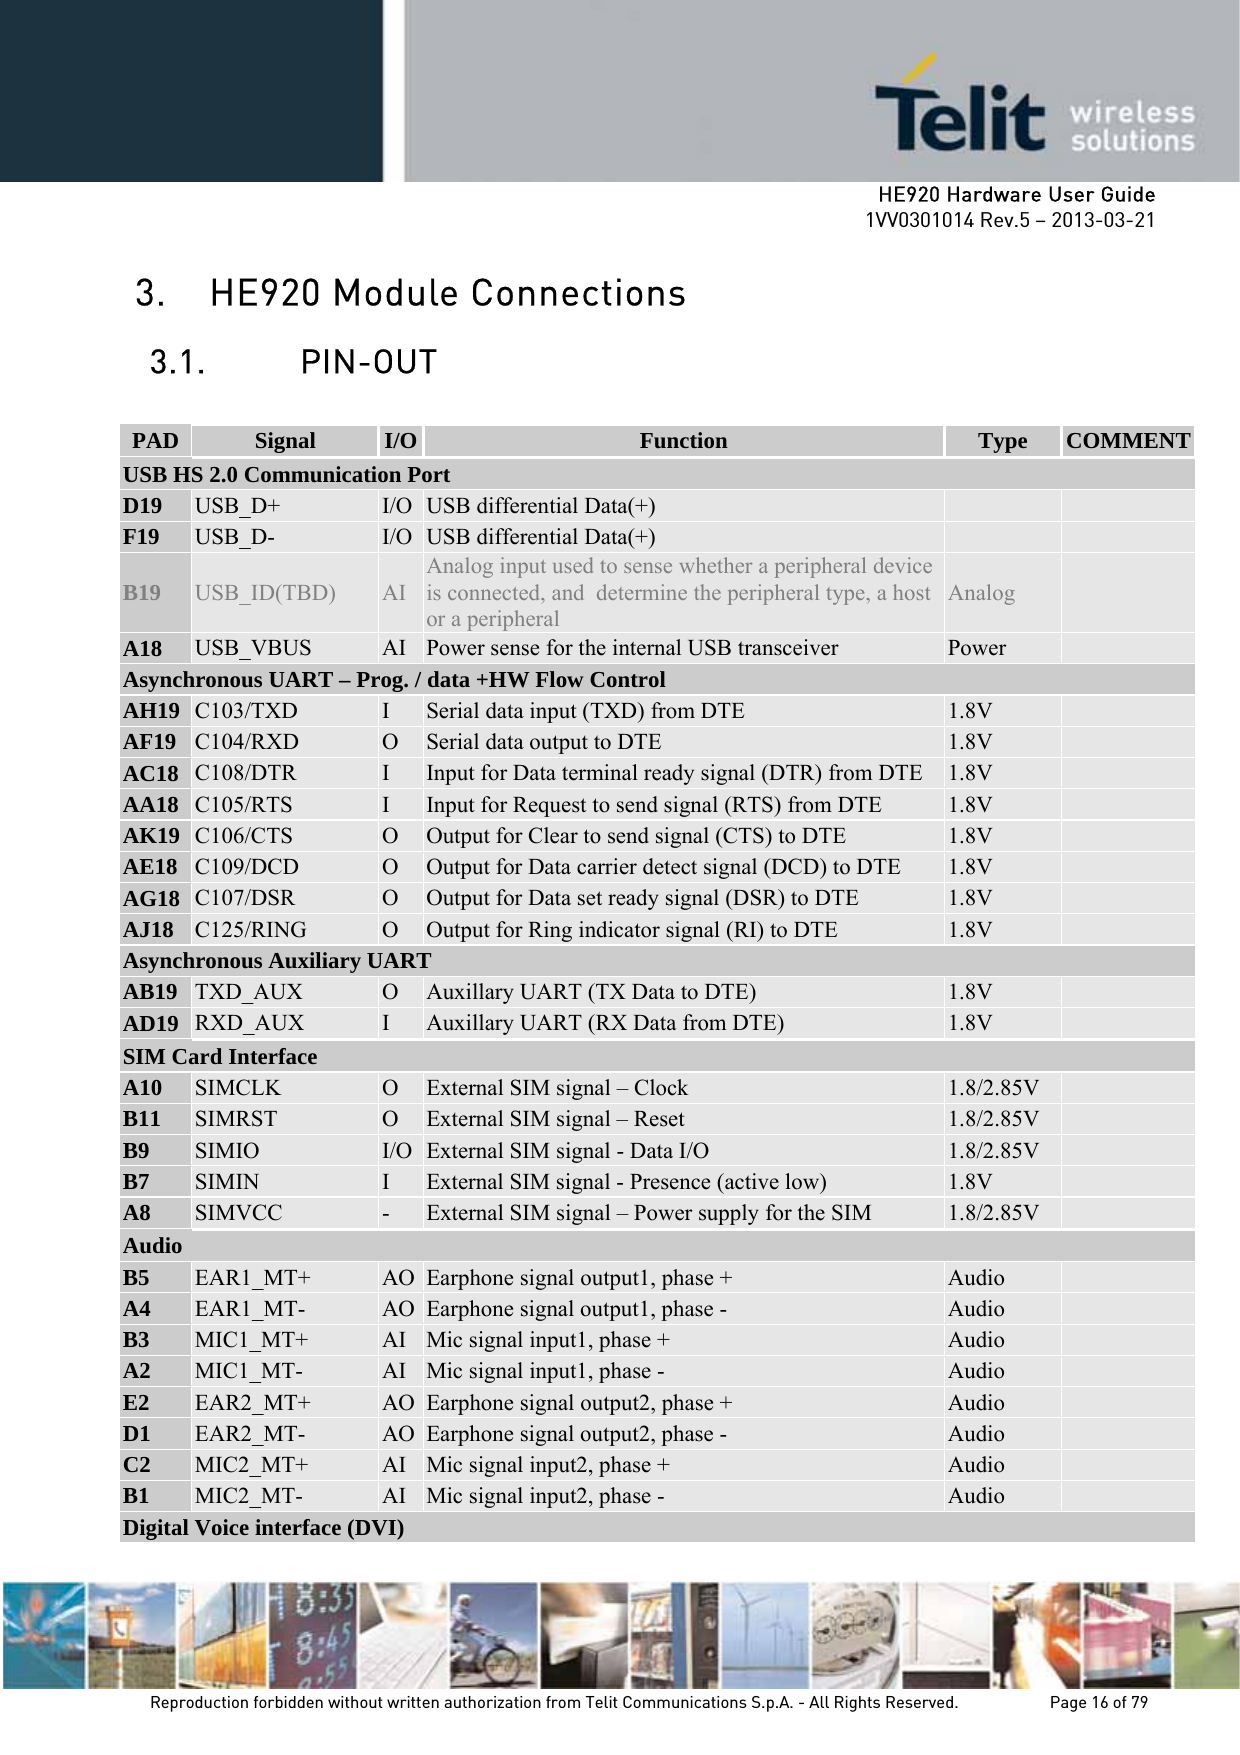     HE920 Hardware User Guide 1VV0301014 Rev.5 – 2013-03-21 Reproduction forbidden without written authorization from Telit Communications S.p.A. - All Rights Reserved.    Page 16 of 79  3. HE920 Module Connections 3.1. PIN-OUT  PAD  Signal  I/O  Function  Type  COMMENTUSB HS 2.0 Communication Port D19  USB_D+  I/O  USB differential Data(+)     F19  USB_D-  I/O  USB differential Data(+)     B19  USB_ID(TBD)  AI Analog input used to sense whether a peripheral device is connected, and  determine the peripheral type, a host  or a peripheral Analog   A18  USB_VBUS  AI  Power sense for the internal USB transceiver  Power   Asynchronous UART – Prog. / data +HW Flow Control AH19  C103/TXD  I  Serial data input (TXD) from DTE  1.8V   AF19  C104/RXD  O  Serial data output to DTE  1.8V   AC18  C108/DTR  I  Input for Data terminal ready signal (DTR) from DTE  1.8V   AA18  C105/RTS  I  Input for Request to send signal (RTS) from DTE  1.8V   AK19  C106/CTS  O  Output for Clear to send signal (CTS) to DTE  1.8V   AE18  C109/DCD  O  Output for Data carrier detect signal (DCD) to DTE  1.8V   AG18  C107/DSR  O  Output for Data set ready signal (DSR) to DTE  1.8V   AJ18  C125/RING  O  Output for Ring indicator signal (RI) to DTE  1.8V   Asynchronous Auxiliary UART AB19  TXD_AUX  O  Auxillary UART (TX Data to DTE)  1.8V   AD19  RXD_AUX  I  Auxillary UART (RX Data from DTE)  1.8V   SIM Card Interface A10  SIMCLK  O  External SIM signal – Clock  1.8/2.85V   B11  SIMRST  O  External SIM signal – Reset  1.8/2.85V   B9  SIMIO  I/O  External SIM signal - Data I/O  1.8/2.85V   B7  SIMIN  I  External SIM signal - Presence (active low)  1.8V   A8  SIMVCC  -  External SIM signal – Power supply for the SIM  1.8/2.85V   Audio B5  EAR1_MT+  AO  Earphone signal output1, phase +  Audio   A4  EAR1_MT-  AO  Earphone signal output1, phase -  Audio   B3  MIC1_MT+  AI  Mic signal input1, phase +  Audio   A2  MIC1_MT-  AI  Mic signal input1, phase -  Audio   E2  EAR2_MT+  AO  Earphone signal output2, phase +  Audio   D1  EAR2_MT-  AO  Earphone signal output2, phase -  Audio   C2  MIC2_MT+  AI  Mic signal input2, phase +  Audio   B1  MIC2_MT-  AI  Mic signal input2, phase -  Audio   Digital Voice interface (DVI) 